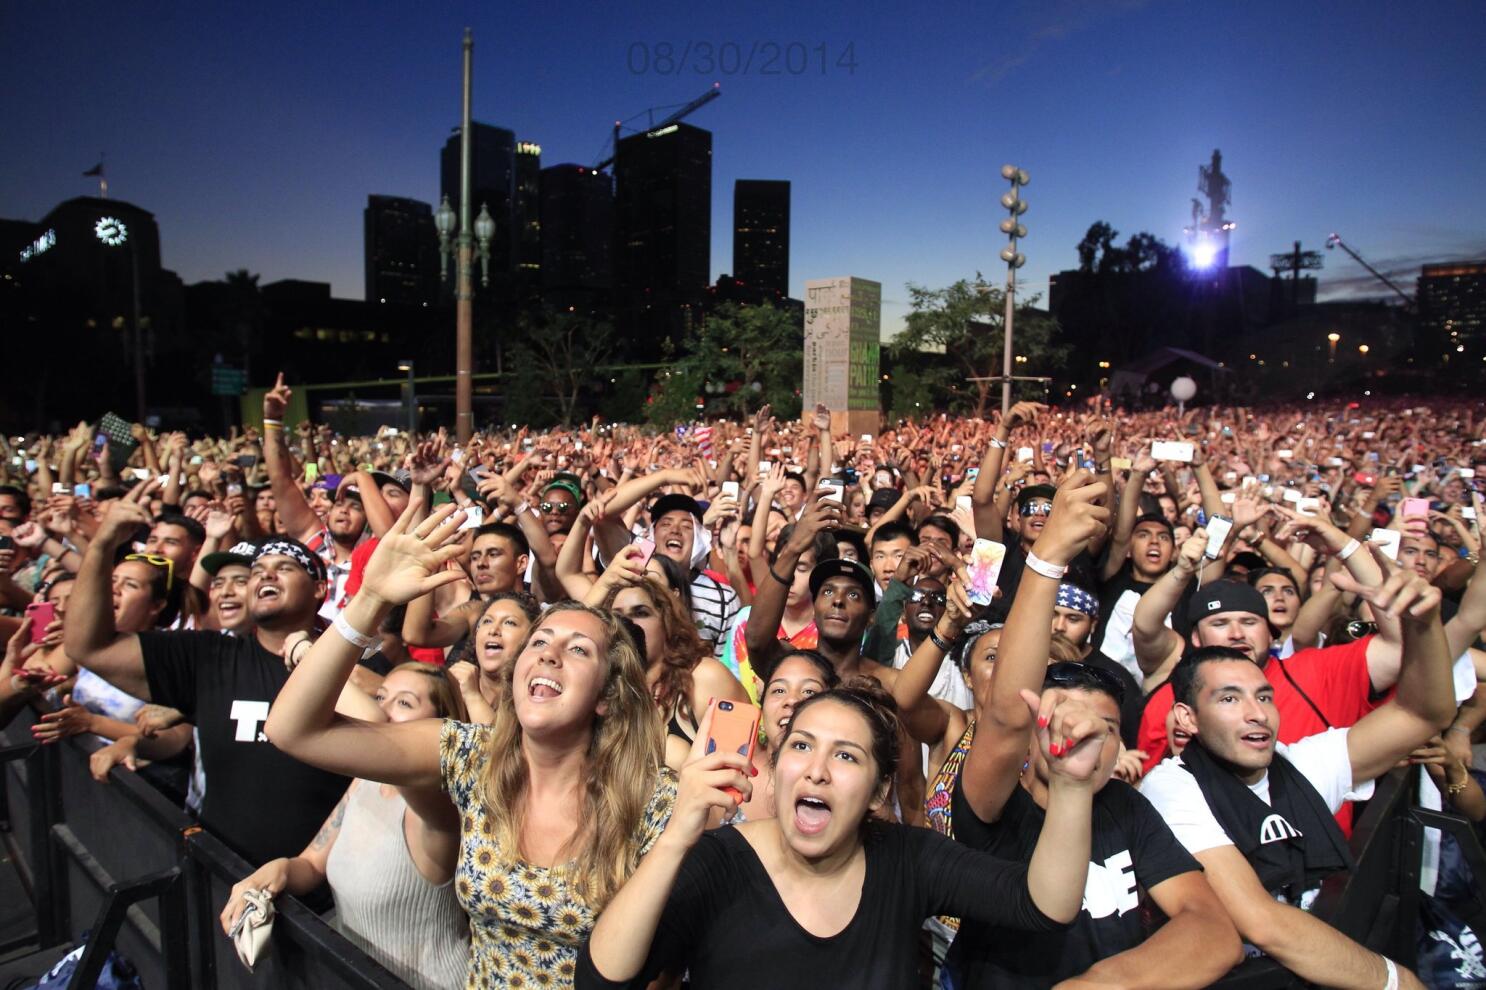 Where To Park for the Made In America Music Festival